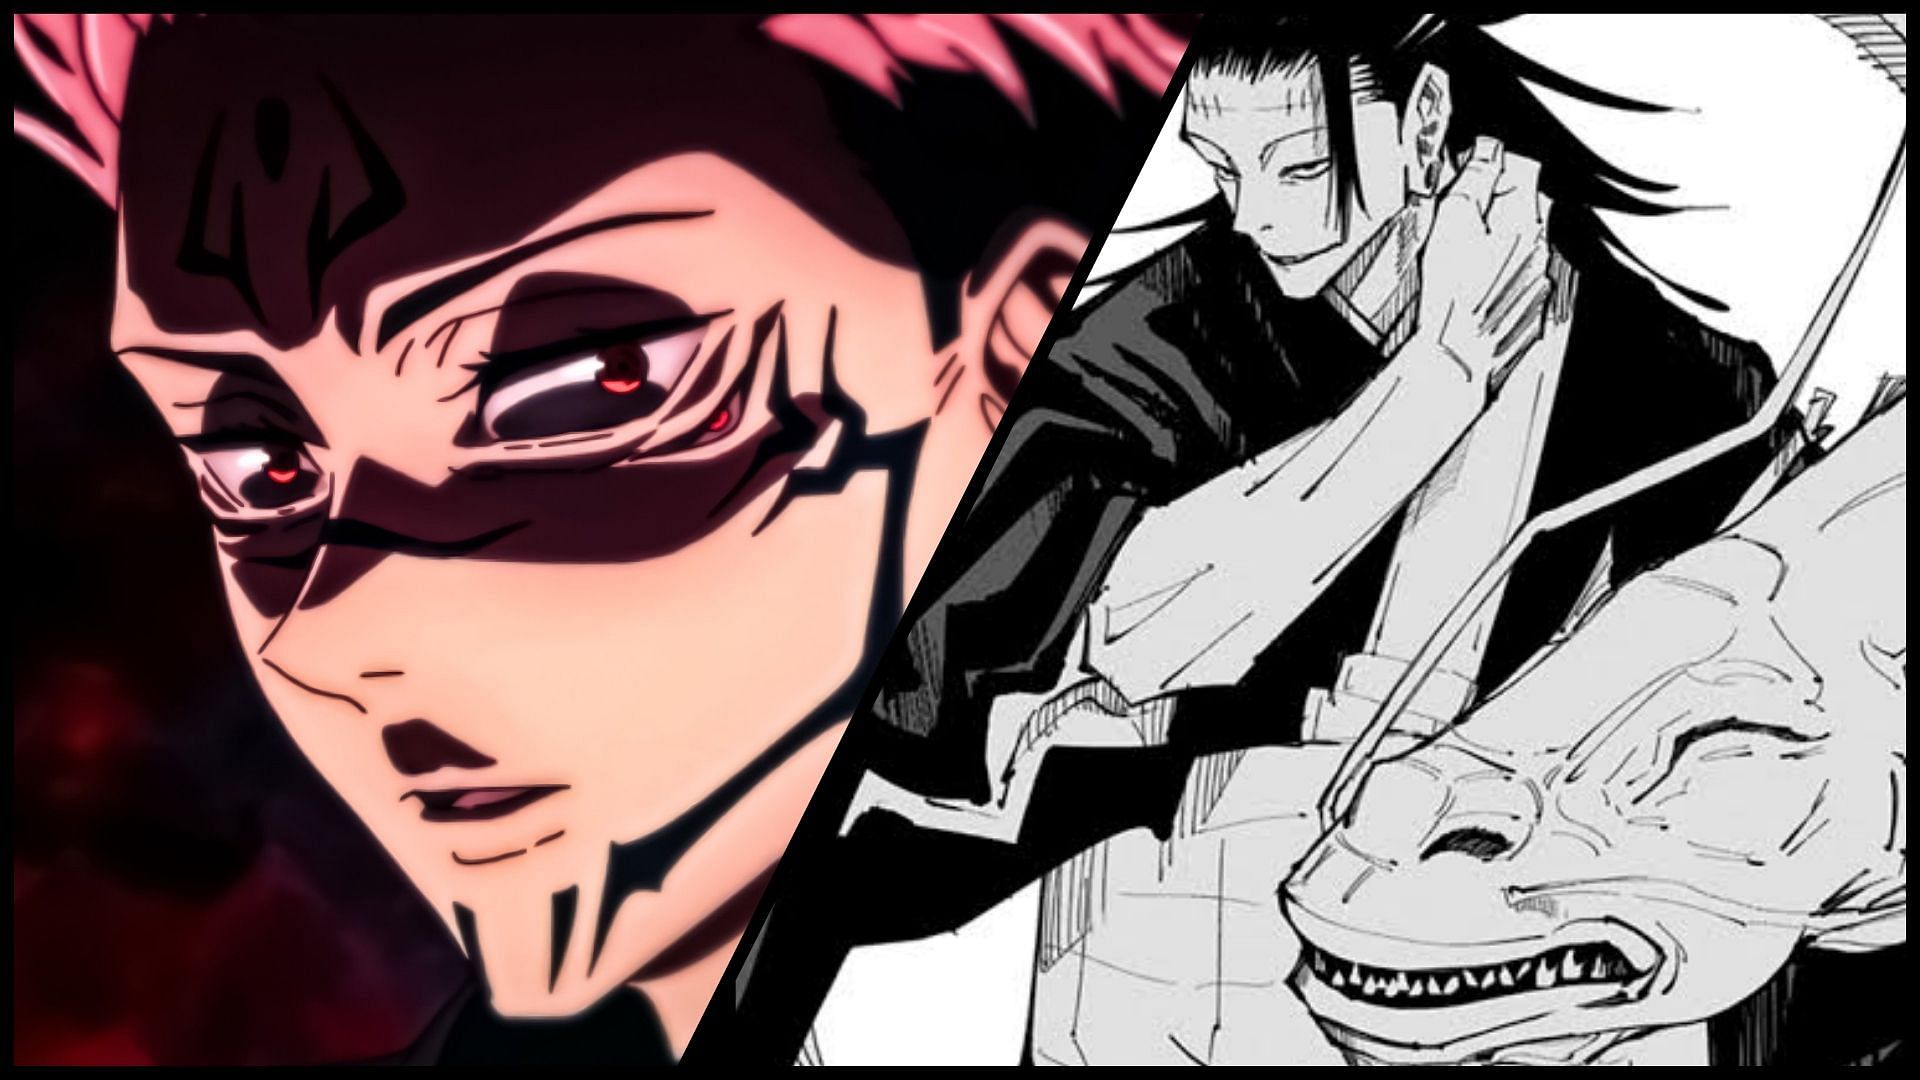 Jujutsu Kaisen chapter 200: What the influx of new players means